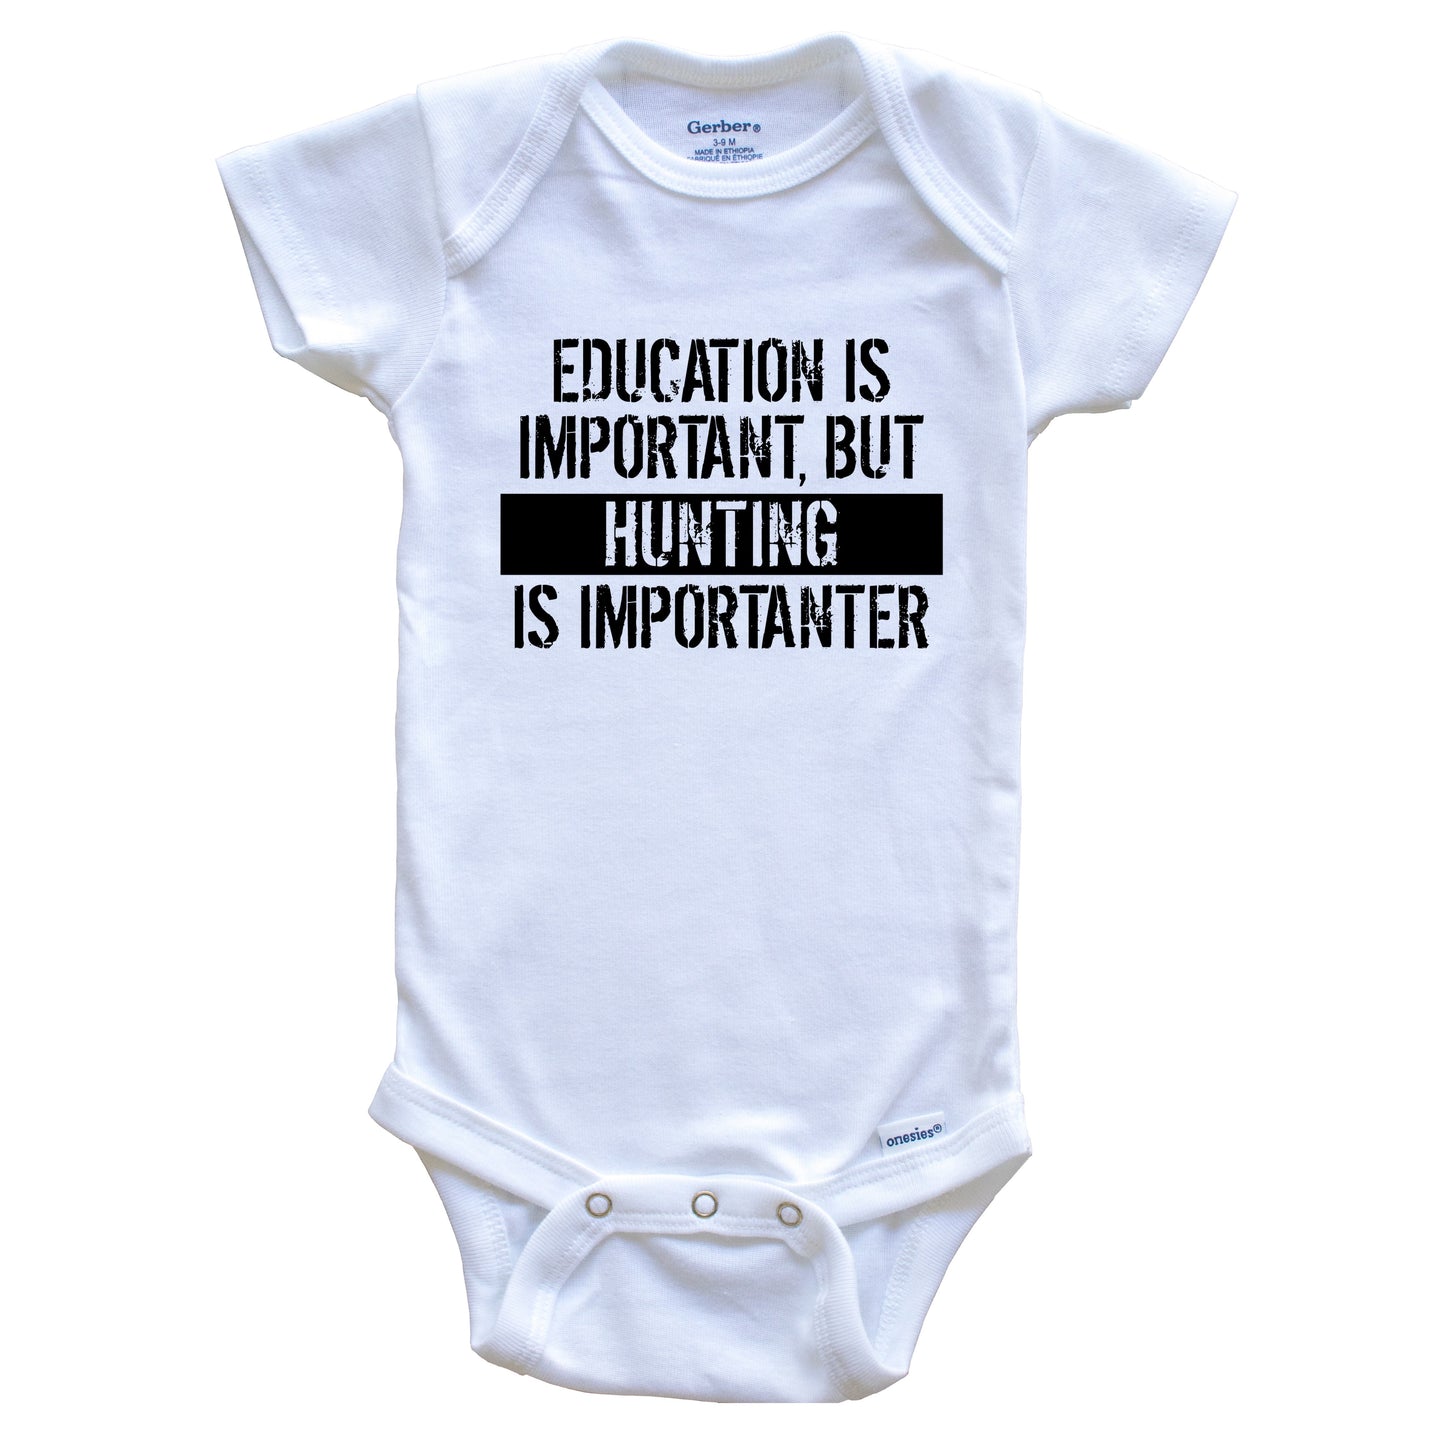 Education Is Important But Hunting Is Importanter Funny Baby Onesie